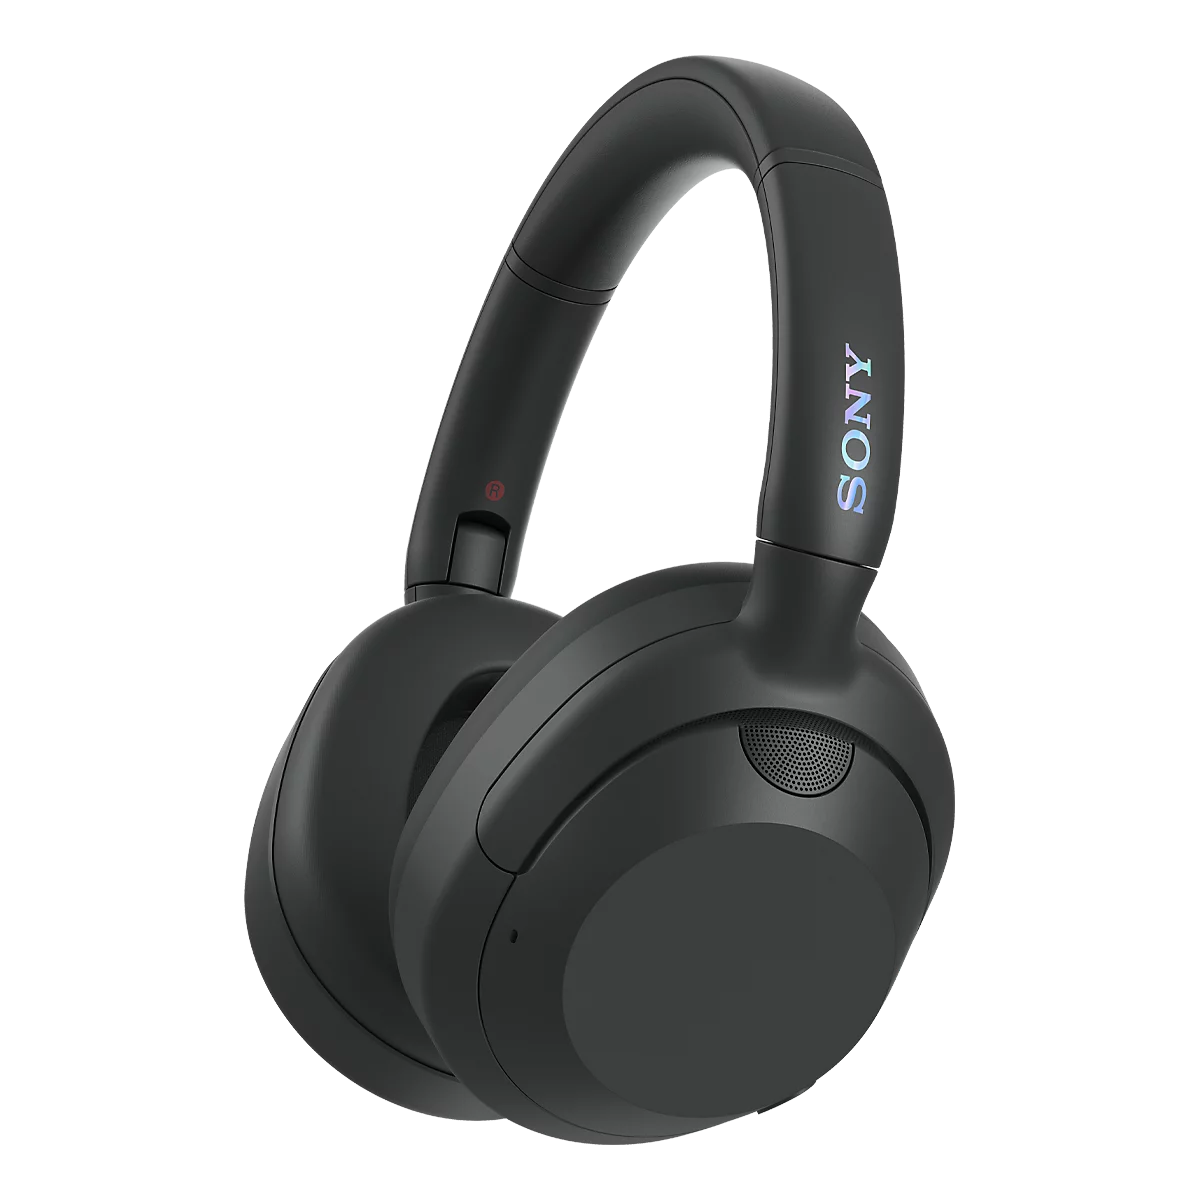 Sony ULT WEAR Noise Canceling Wireless Headphones with Alexa Built-in Massive Bass and Comfortable Design - Black